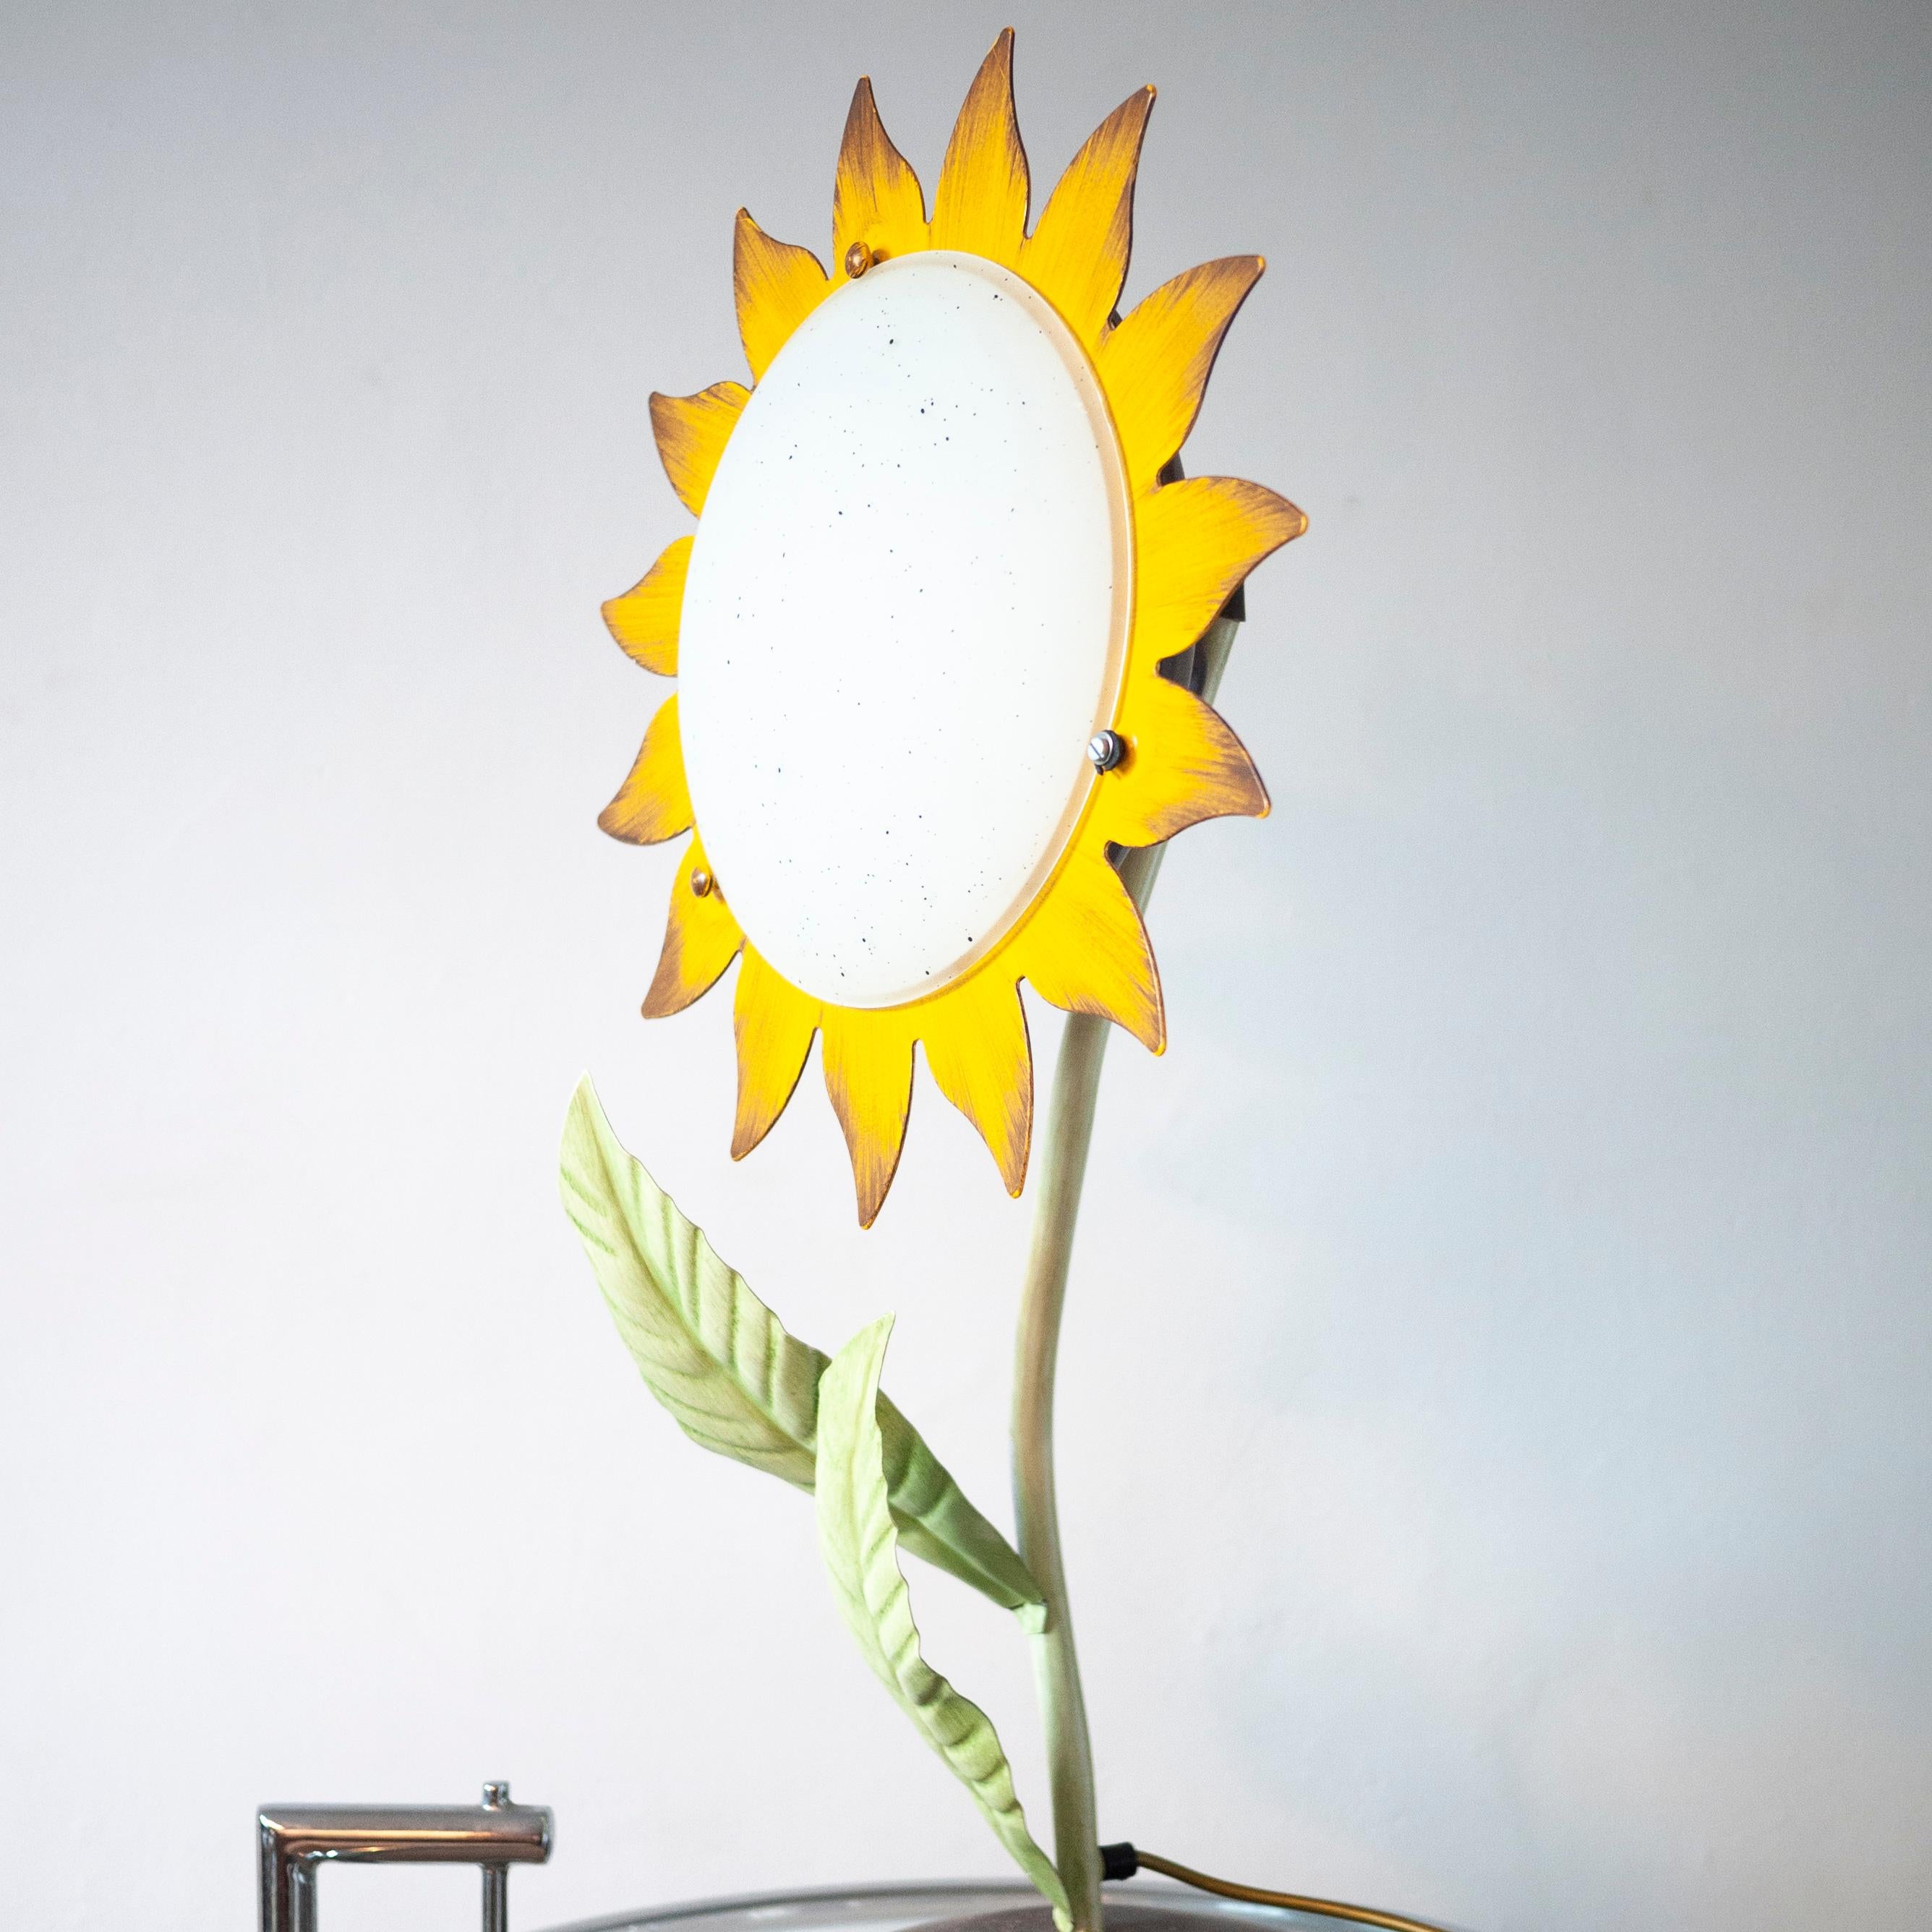 Decorative Midcentury Italian Metal Painted Sunflower Table Lamp, 1970s For Sale 2